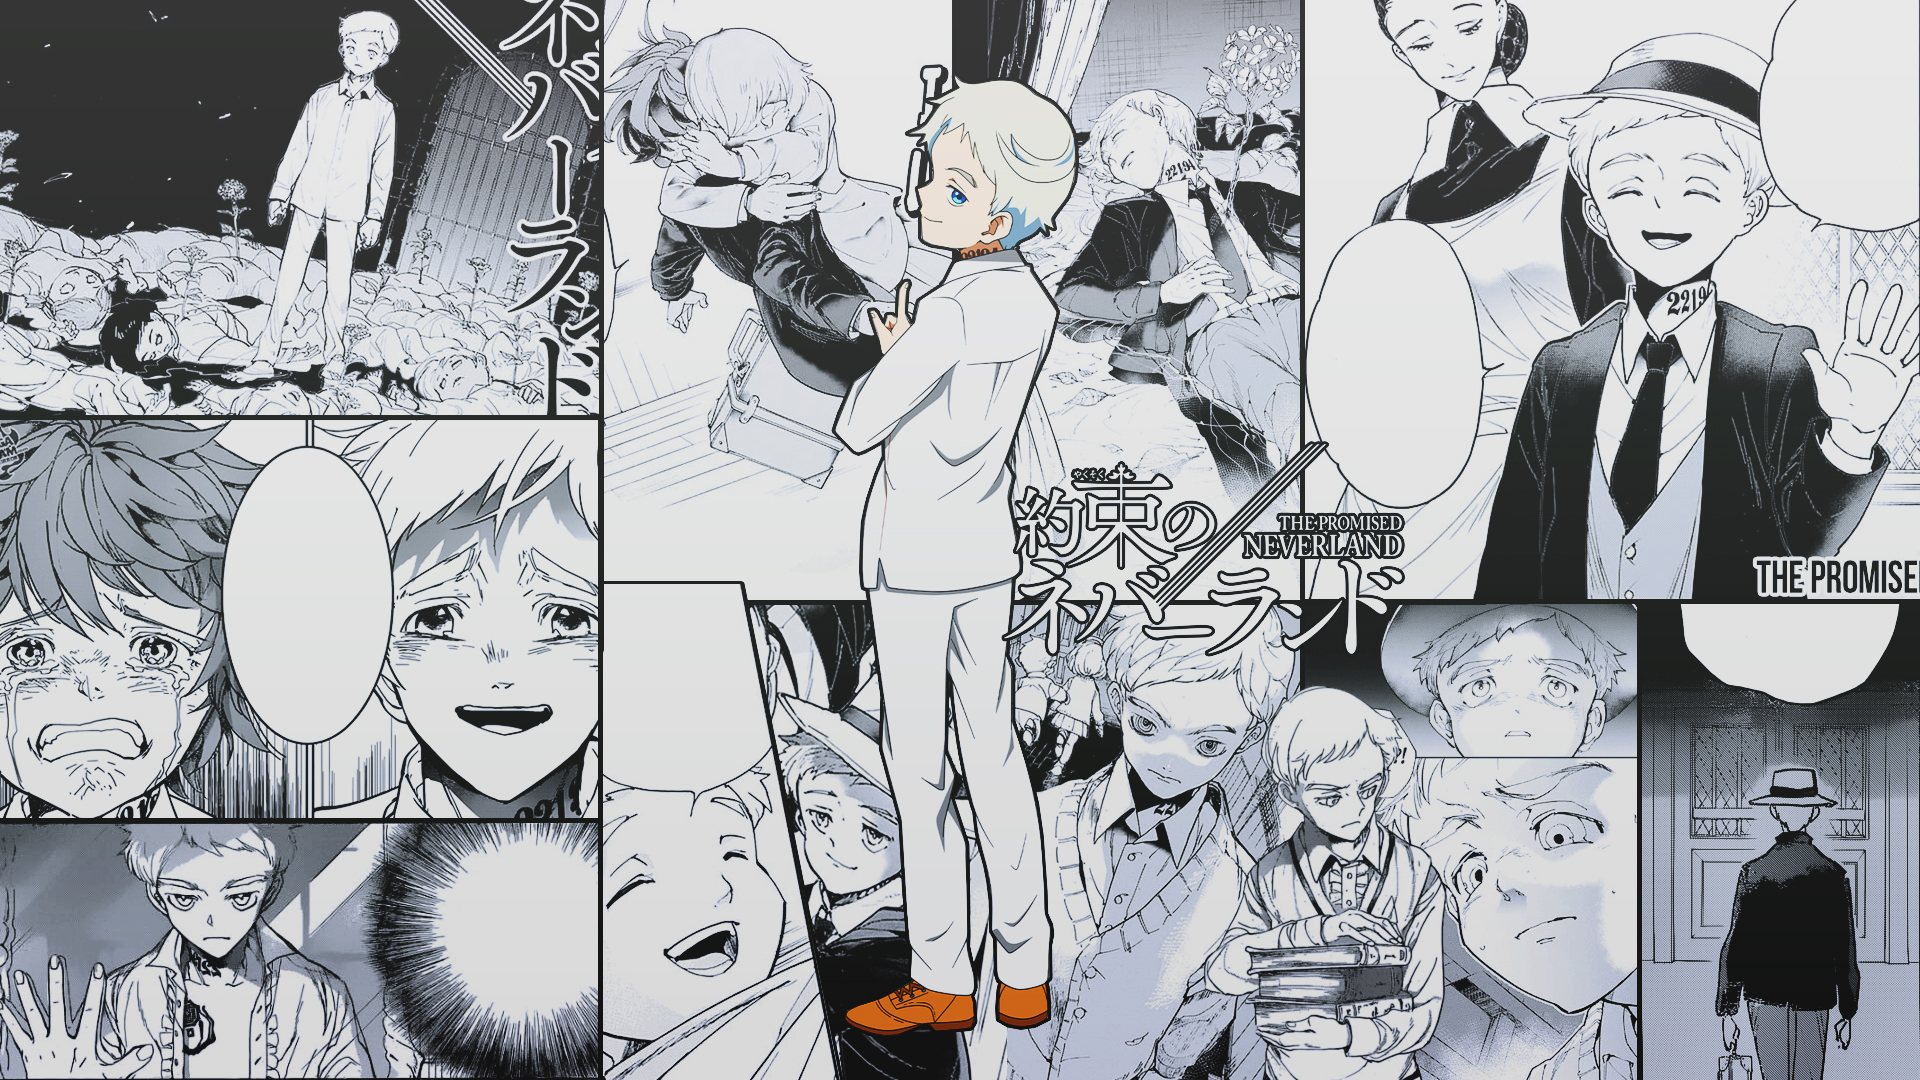 The Promised Neverland - wide 1